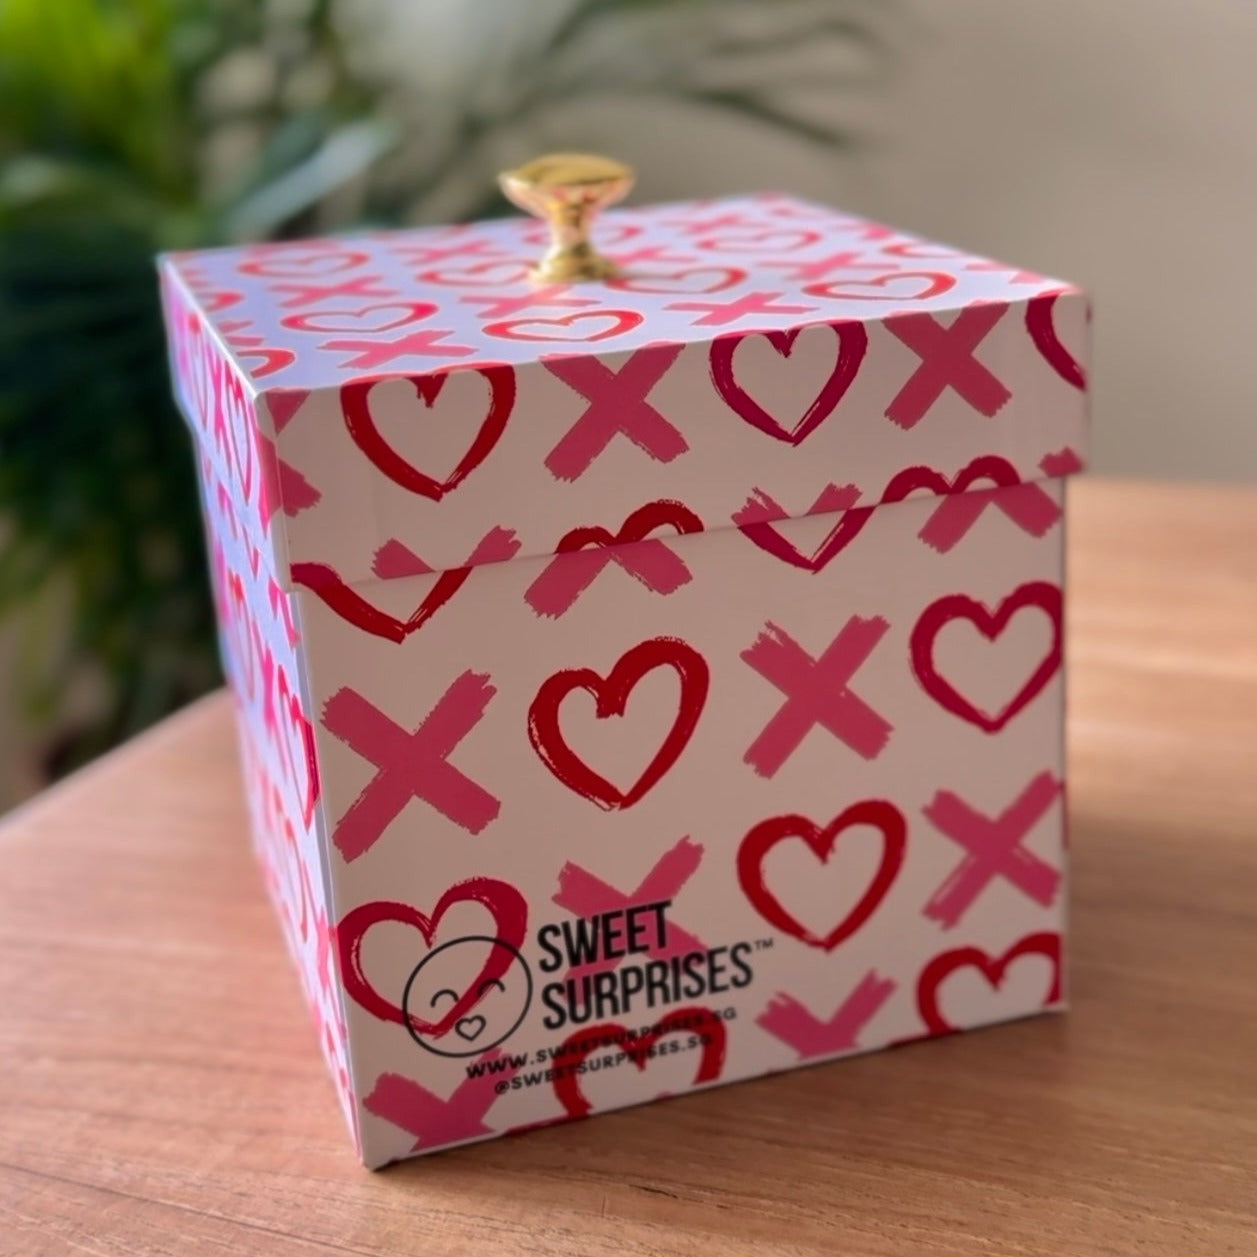 (Love Box) Surprise with Magic: Butterfly Explosion Box!